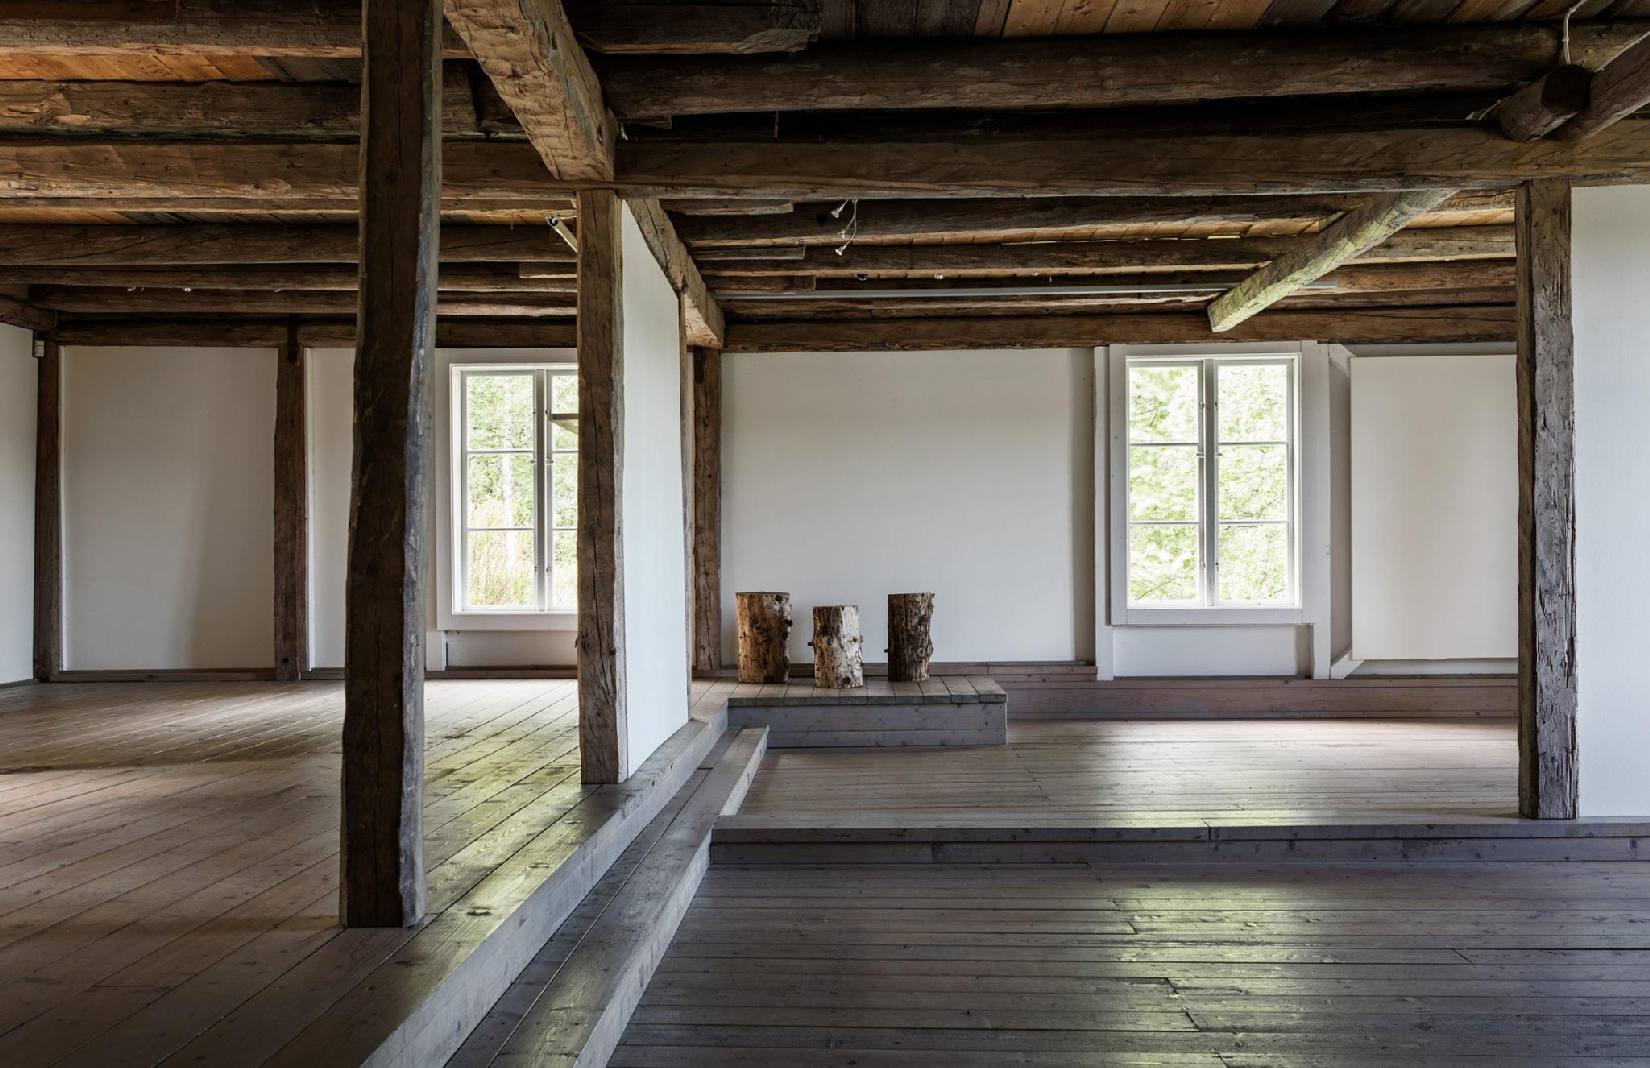 Estate in Sweden’s Husum comes with its own art gallery